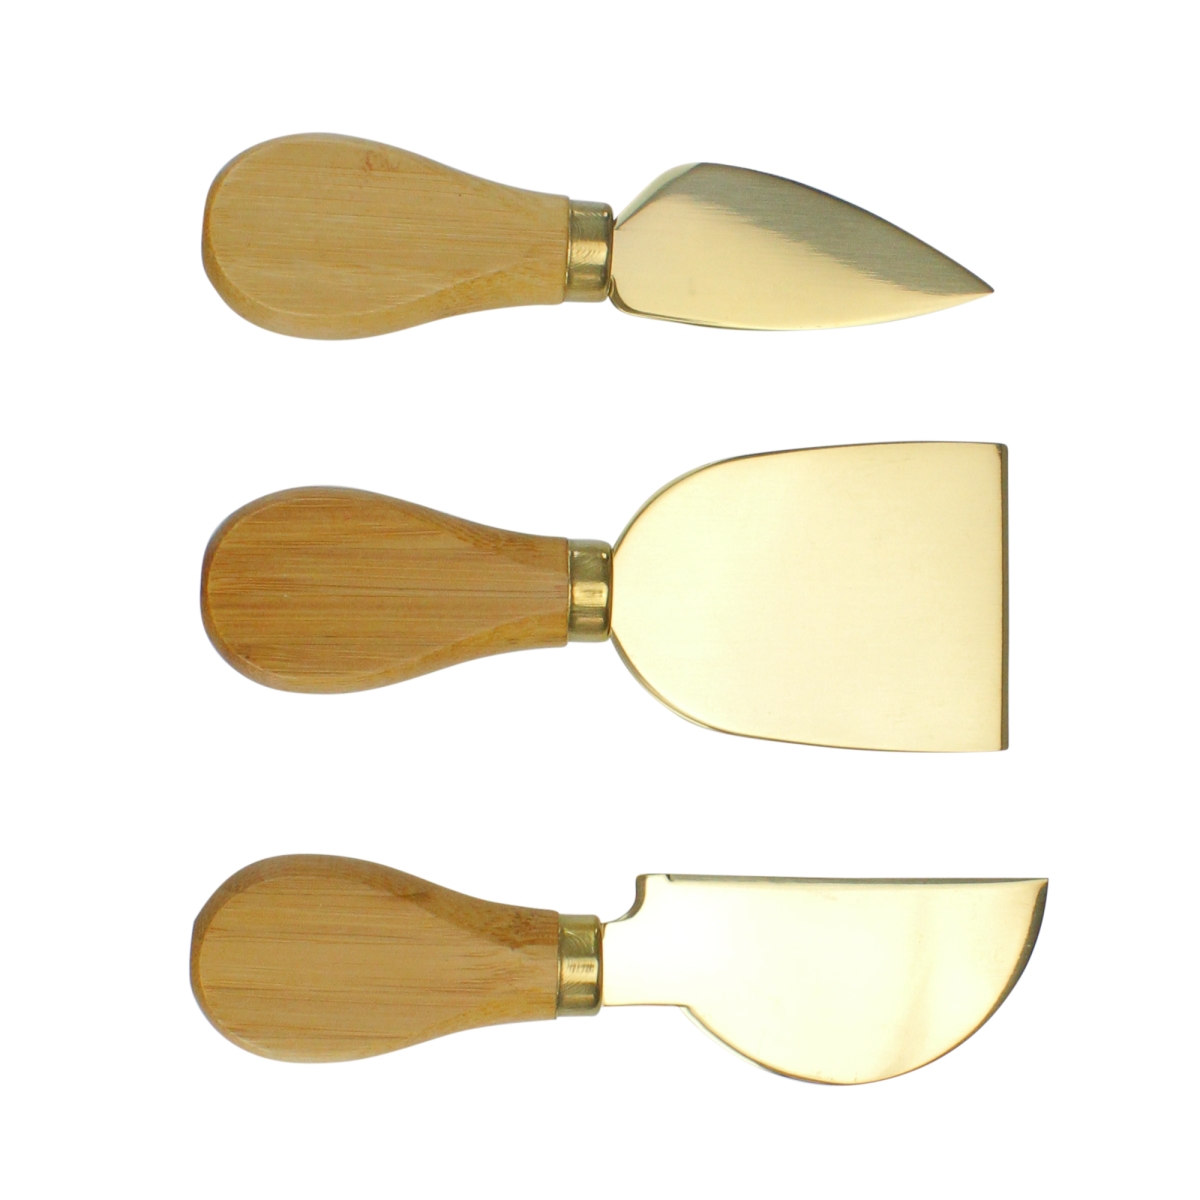 Picture of Avon 33537599 5 x 2 in. Golden Cheese Knife with Bamboo Handle - Set of 3